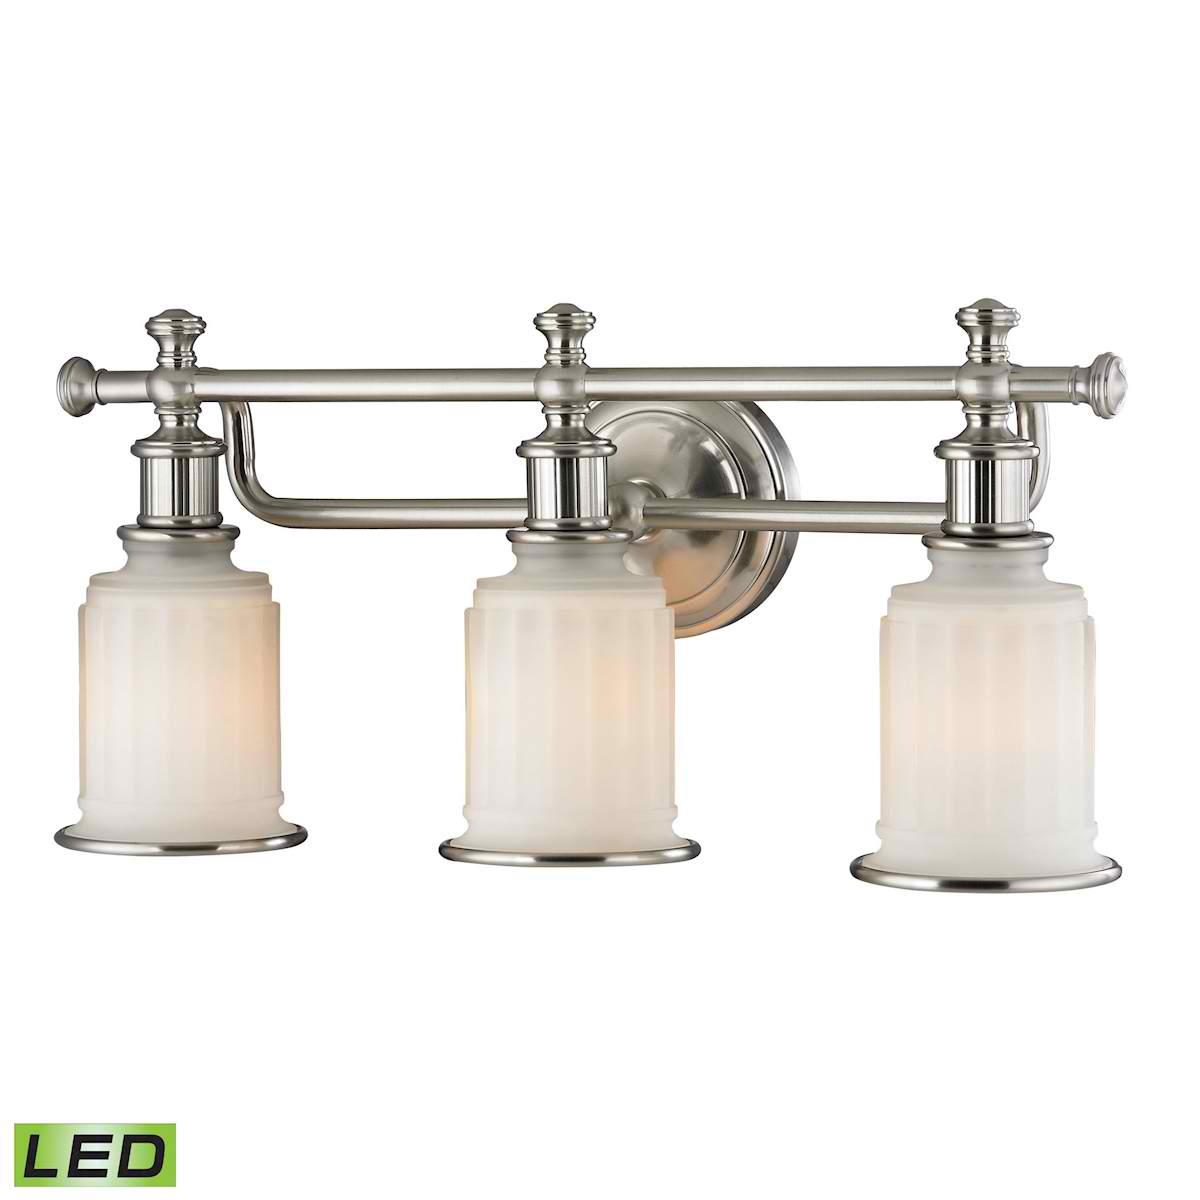 Acadia Collection 3 Light Bath in Brushed Nickel - LED, 800 Lumens (2400 Lumens Total) with Full Scale